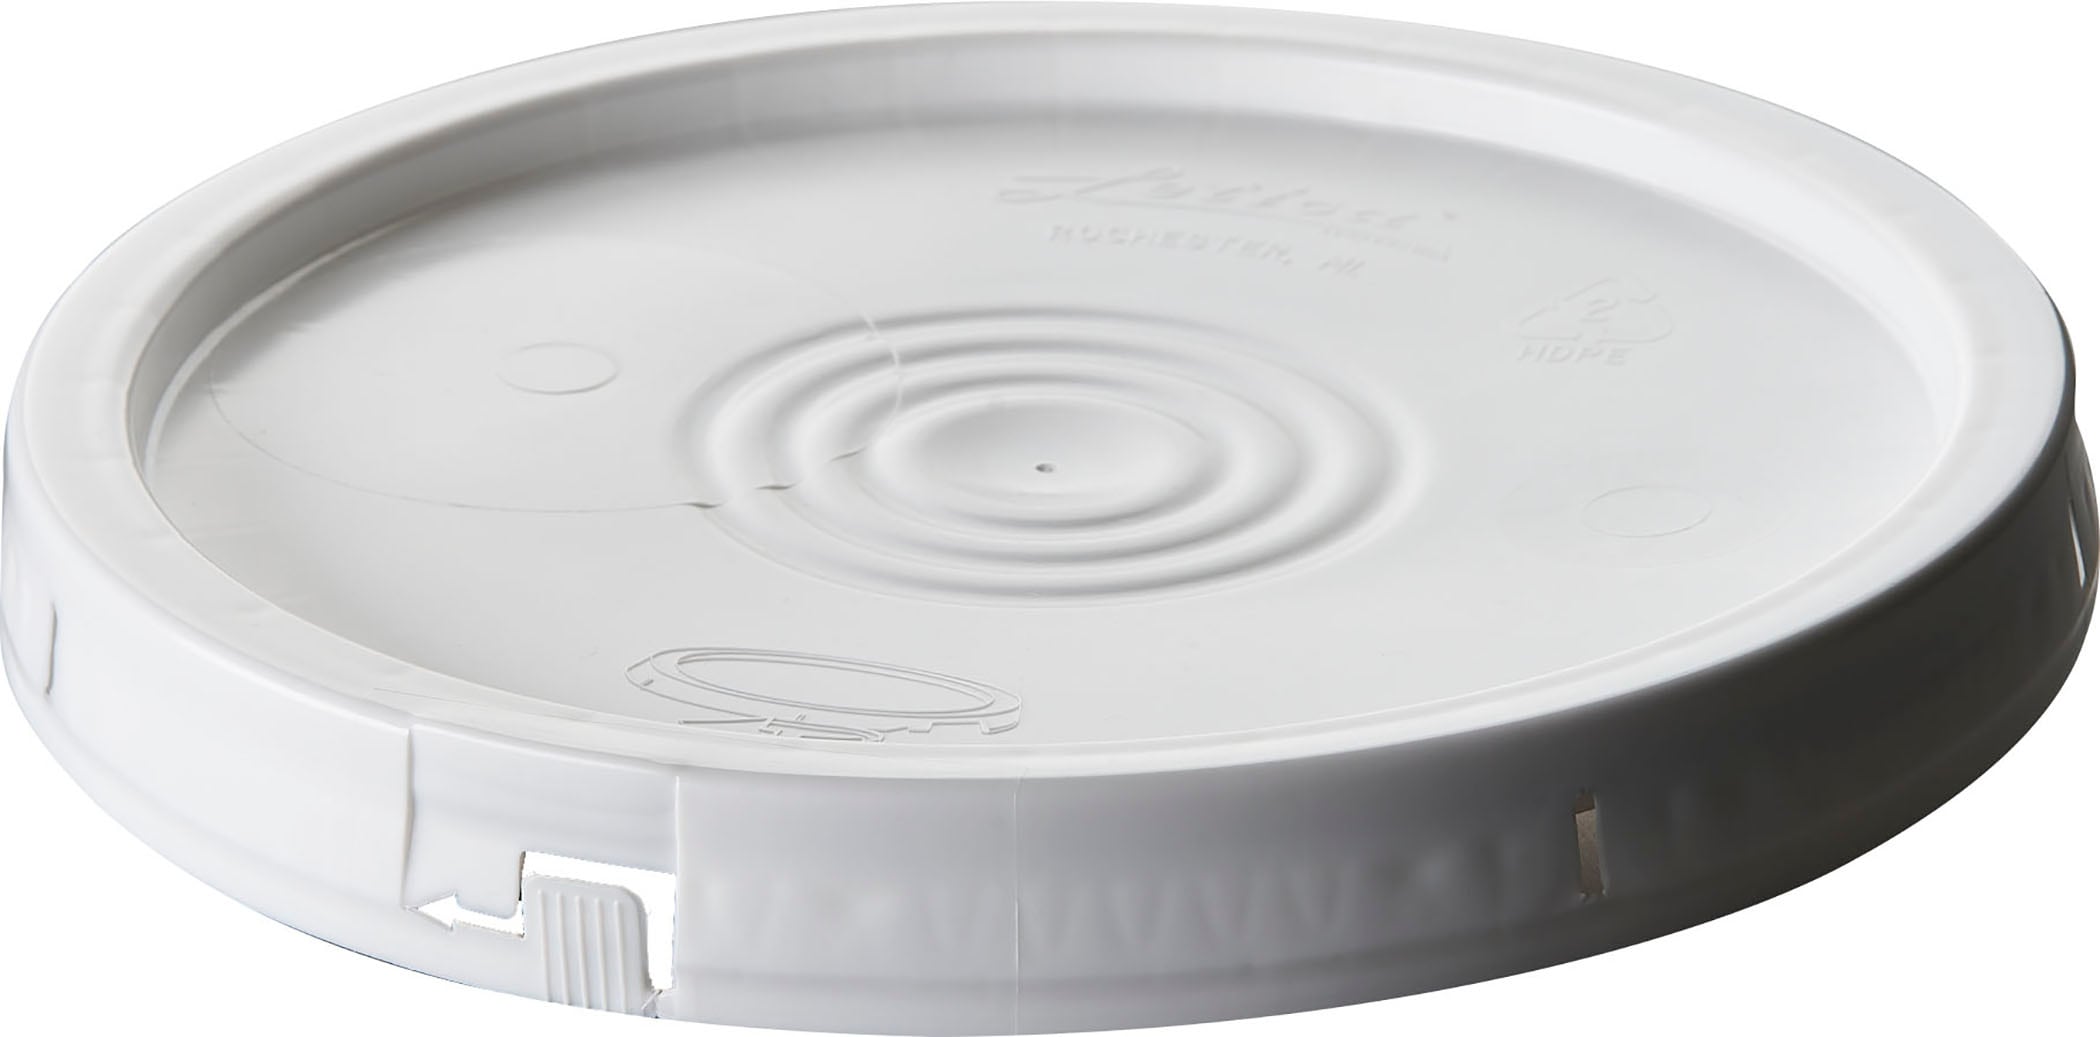 Letica 5-Gallon White Plastic Bucket Lid at Lowes.com